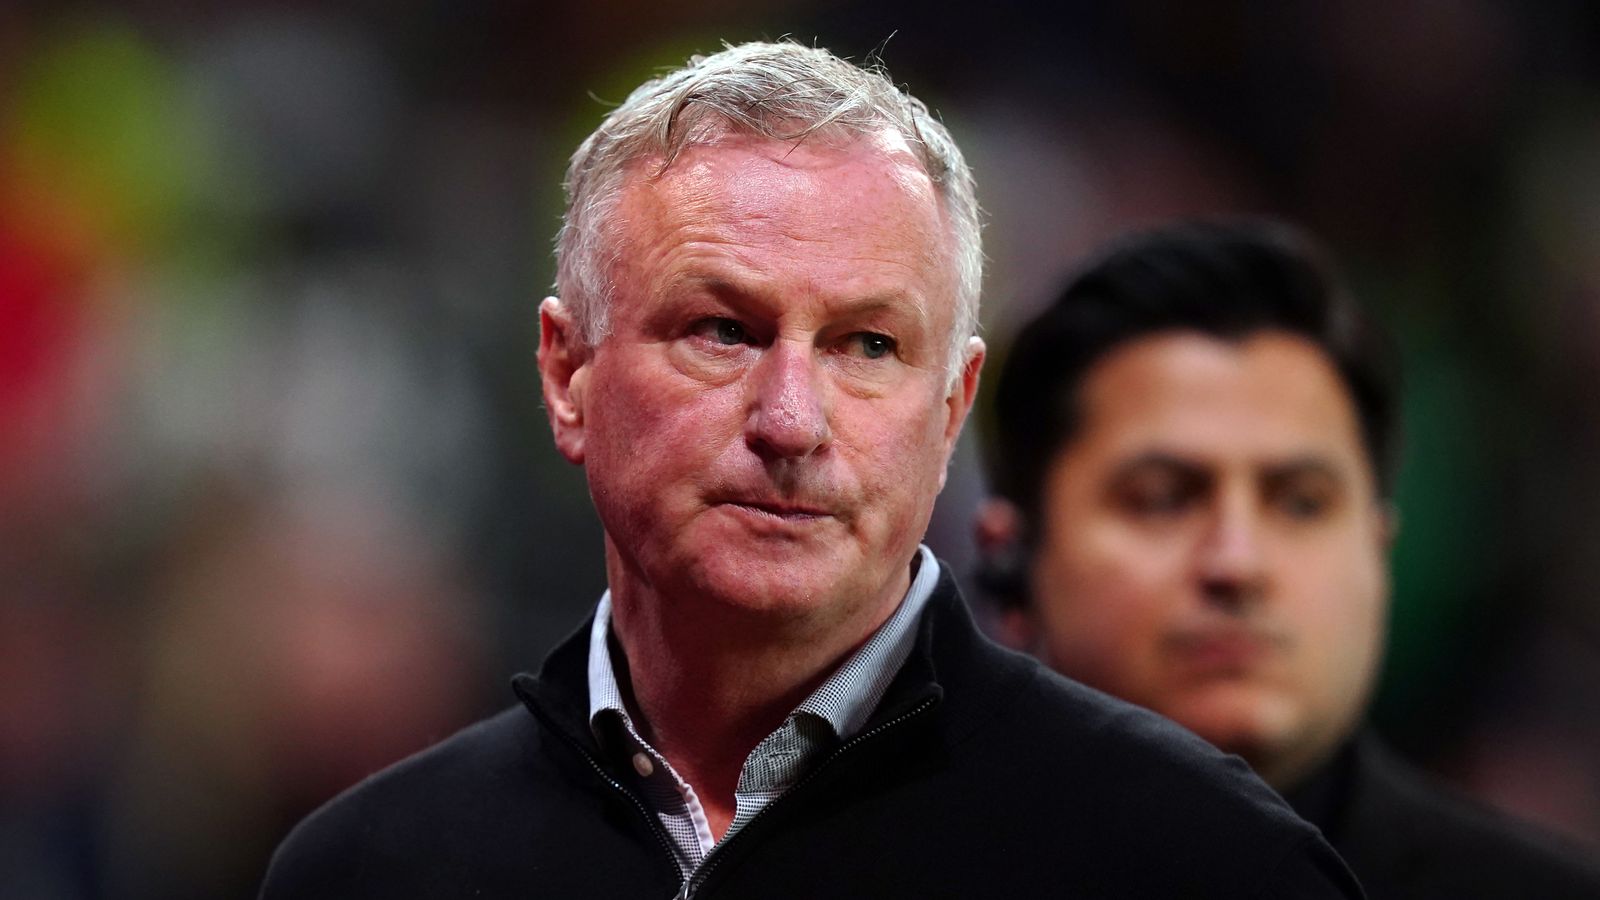 Stoke City sack manager Michael O'Neill after poor start to Championship season